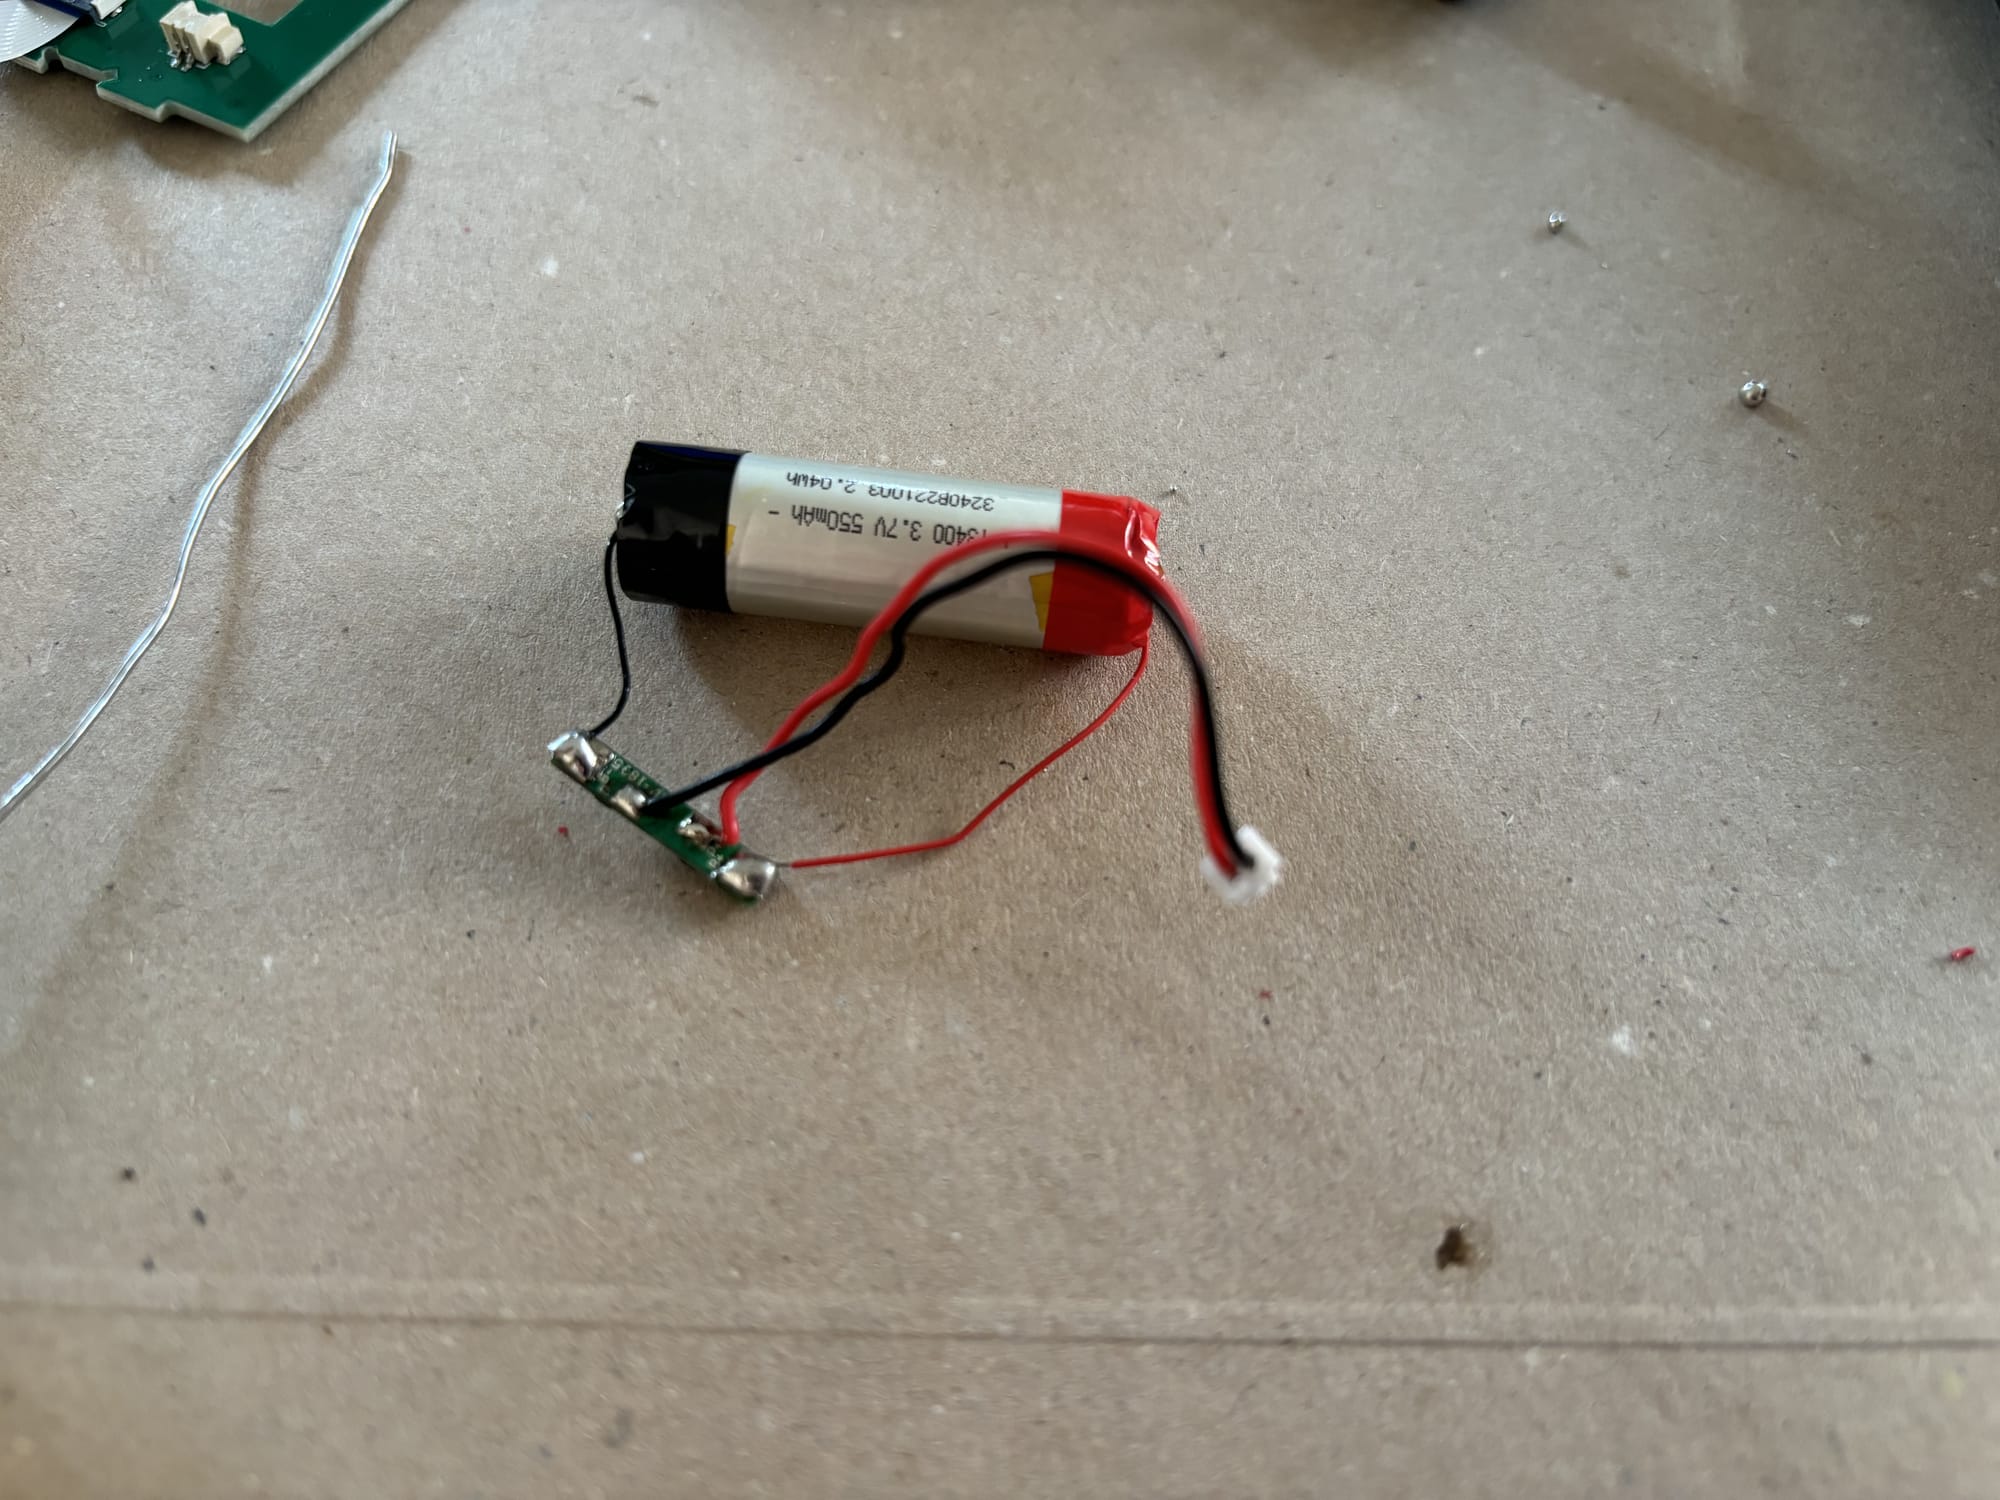 The battery protection circuit soldered onto the smaller battery.